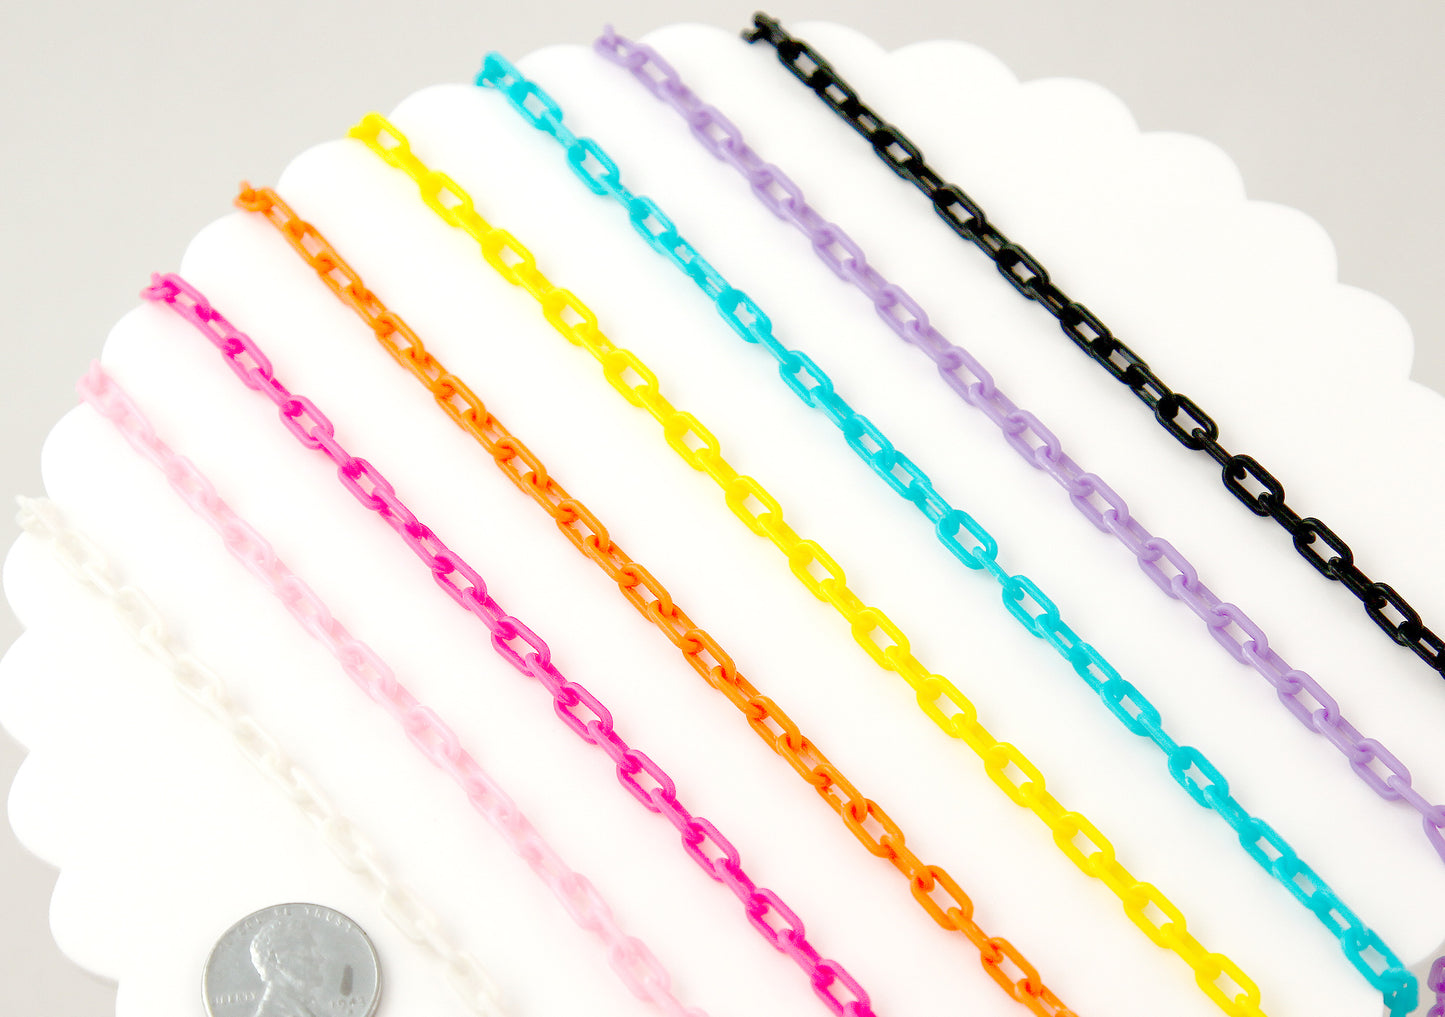 Tiny Plastic Chain - 8mm Tiny Plastic Chain - 20 inches or 55 cm - for Necklaces, Jewelry, Accessories - 4 pcs set